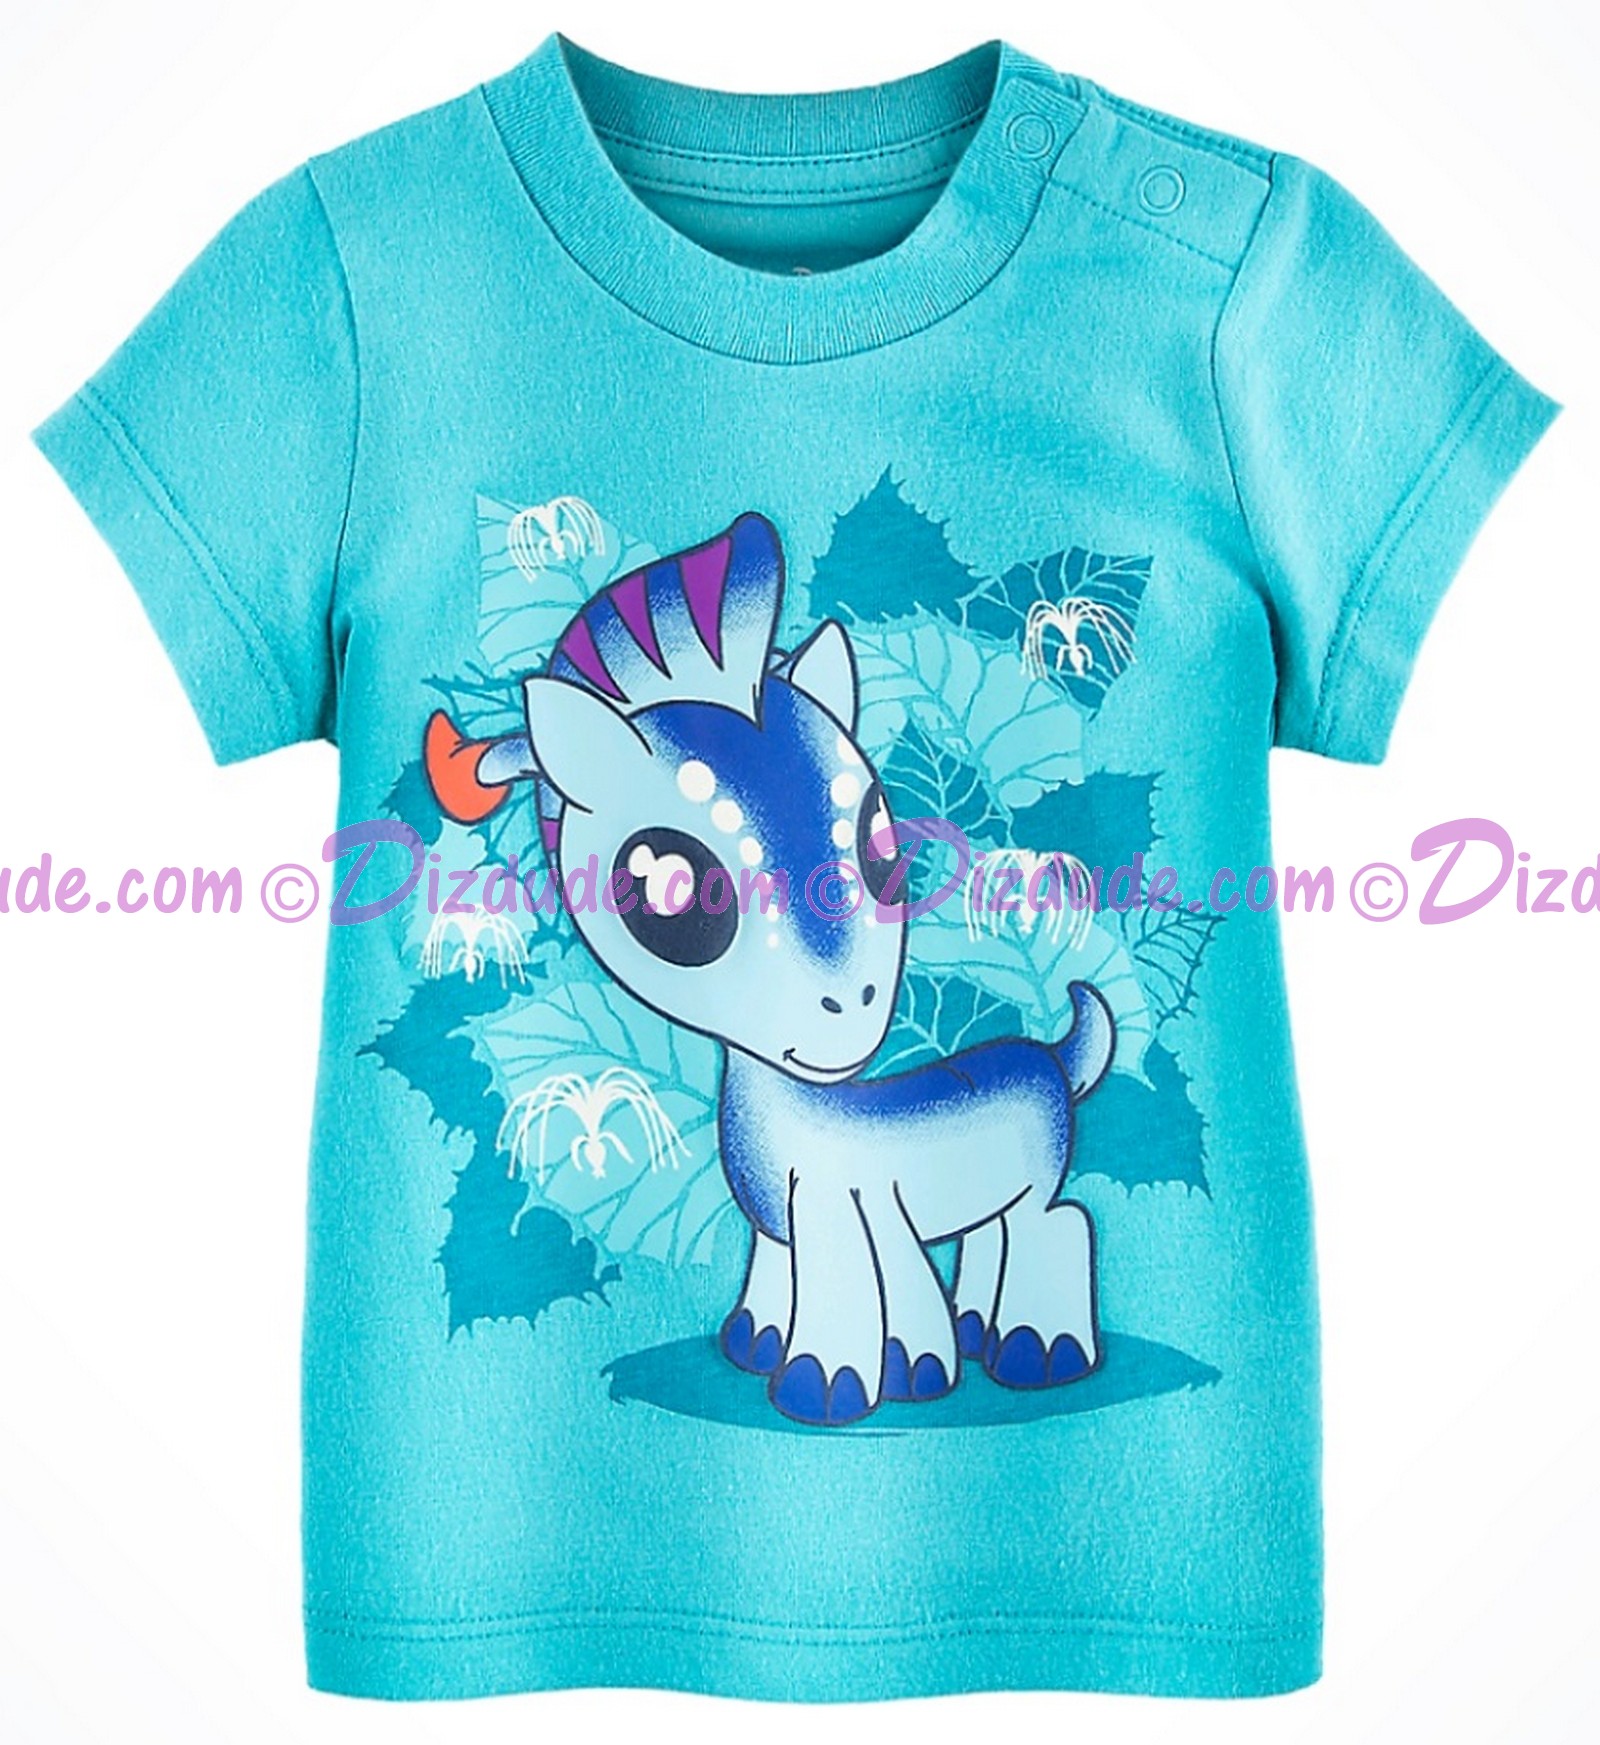 (SOLD OUT) Avatar Direhorse Infant T-shirt (Tee, Tshirt or T shirt) - Disney Pandora – The World of Avatar